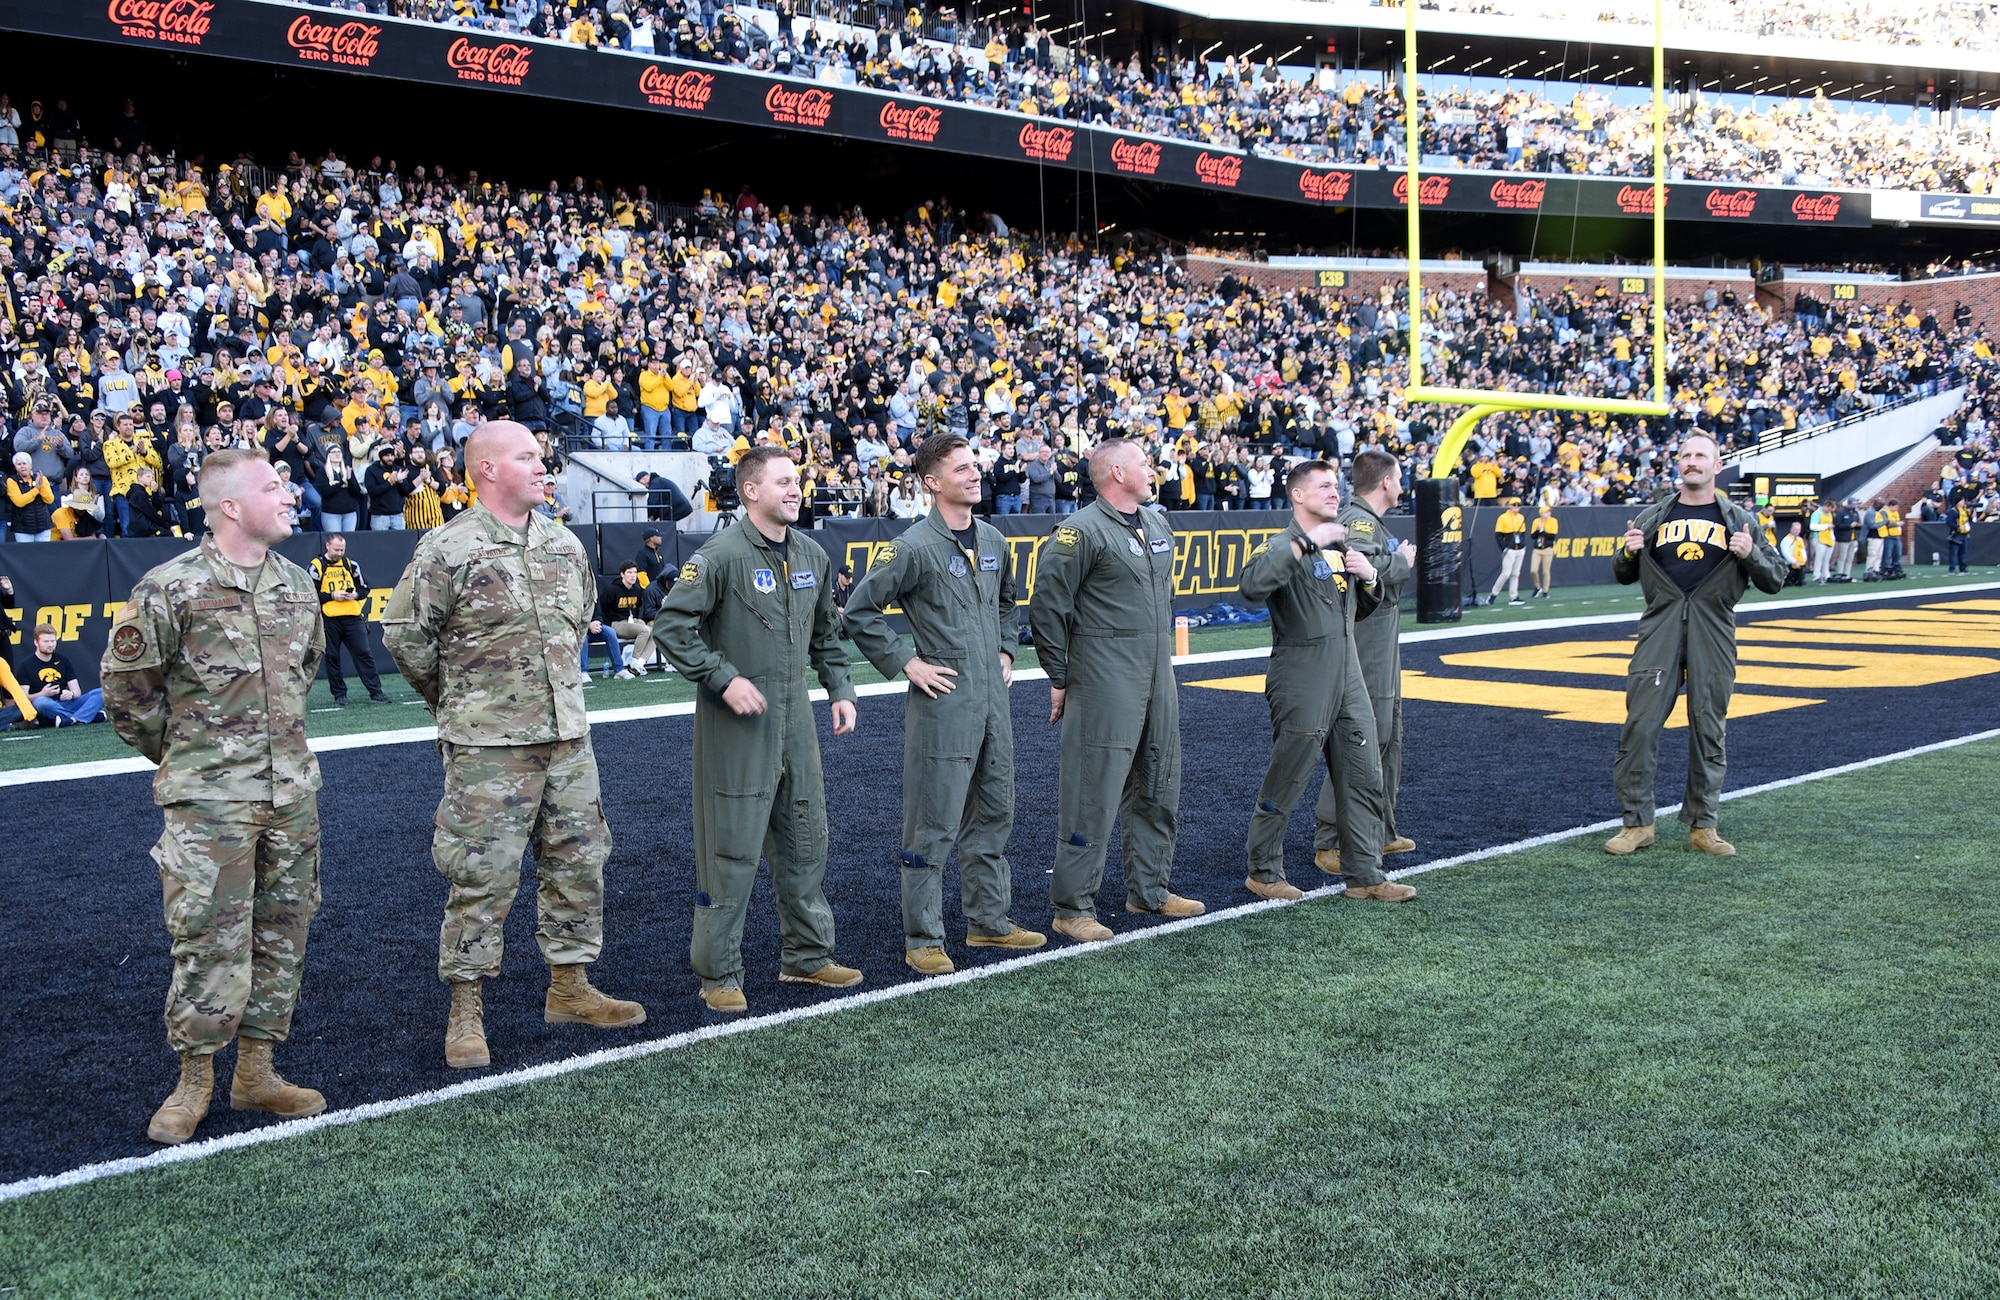 Iowa National Guard aircrew is performing a flyover at Kinnick Stadium in Iowa City